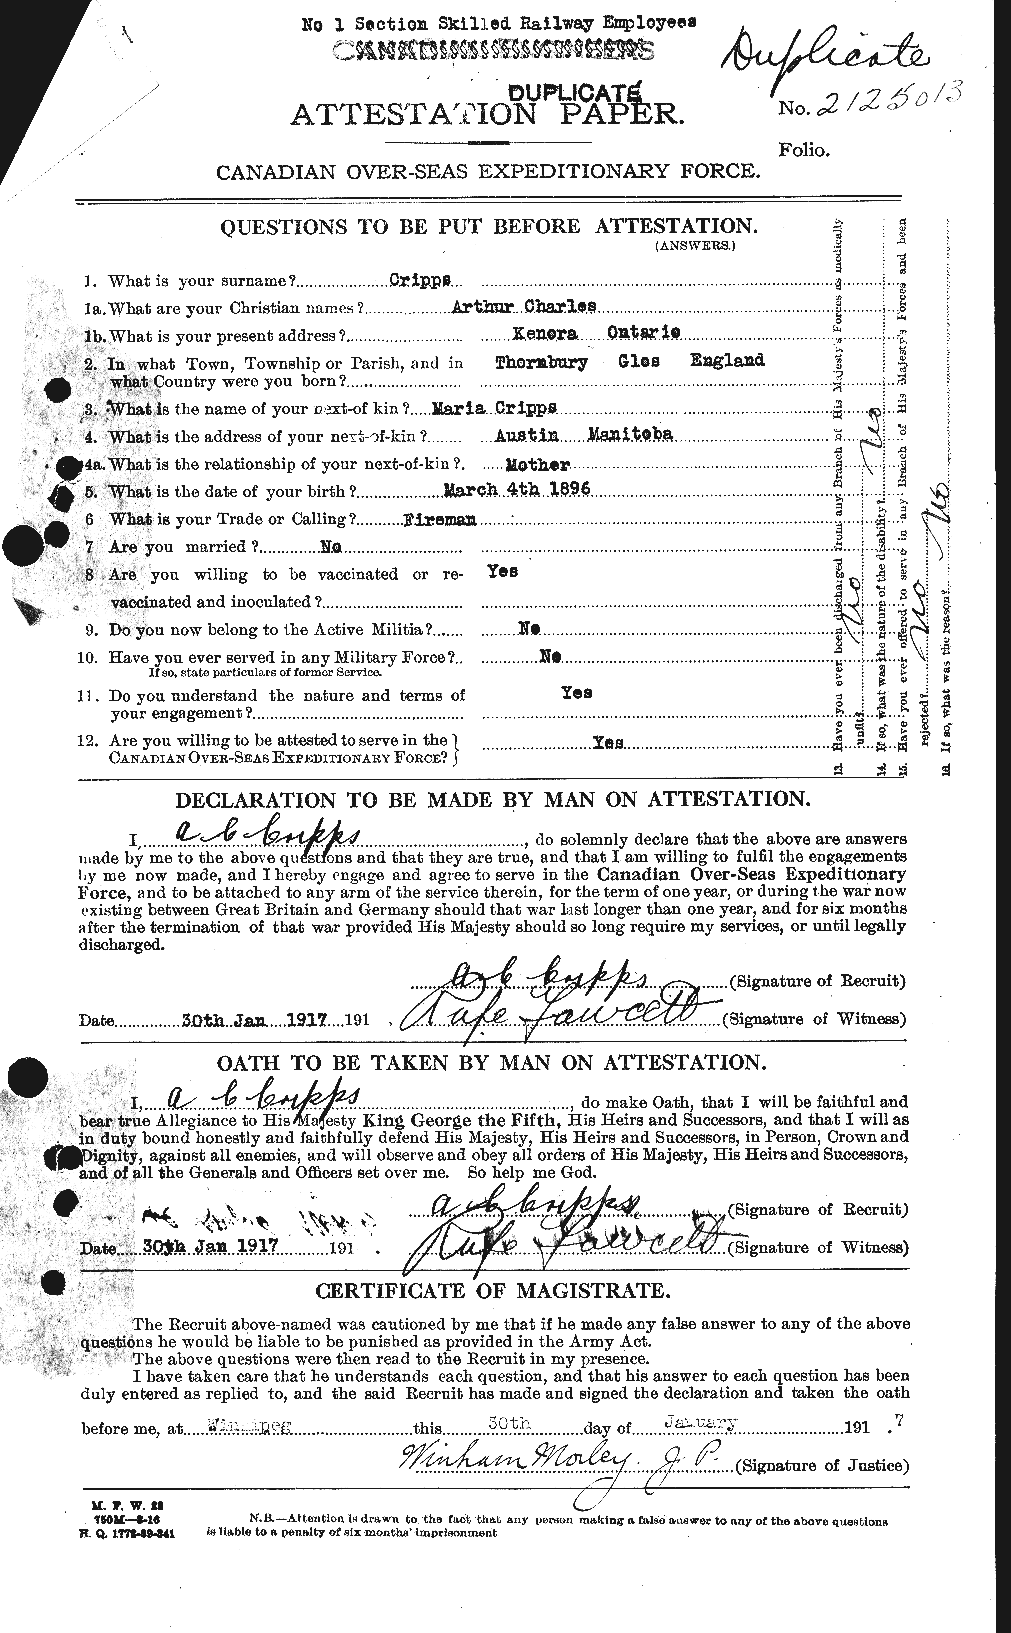 Personnel Records of the First World War - CEF 065458a